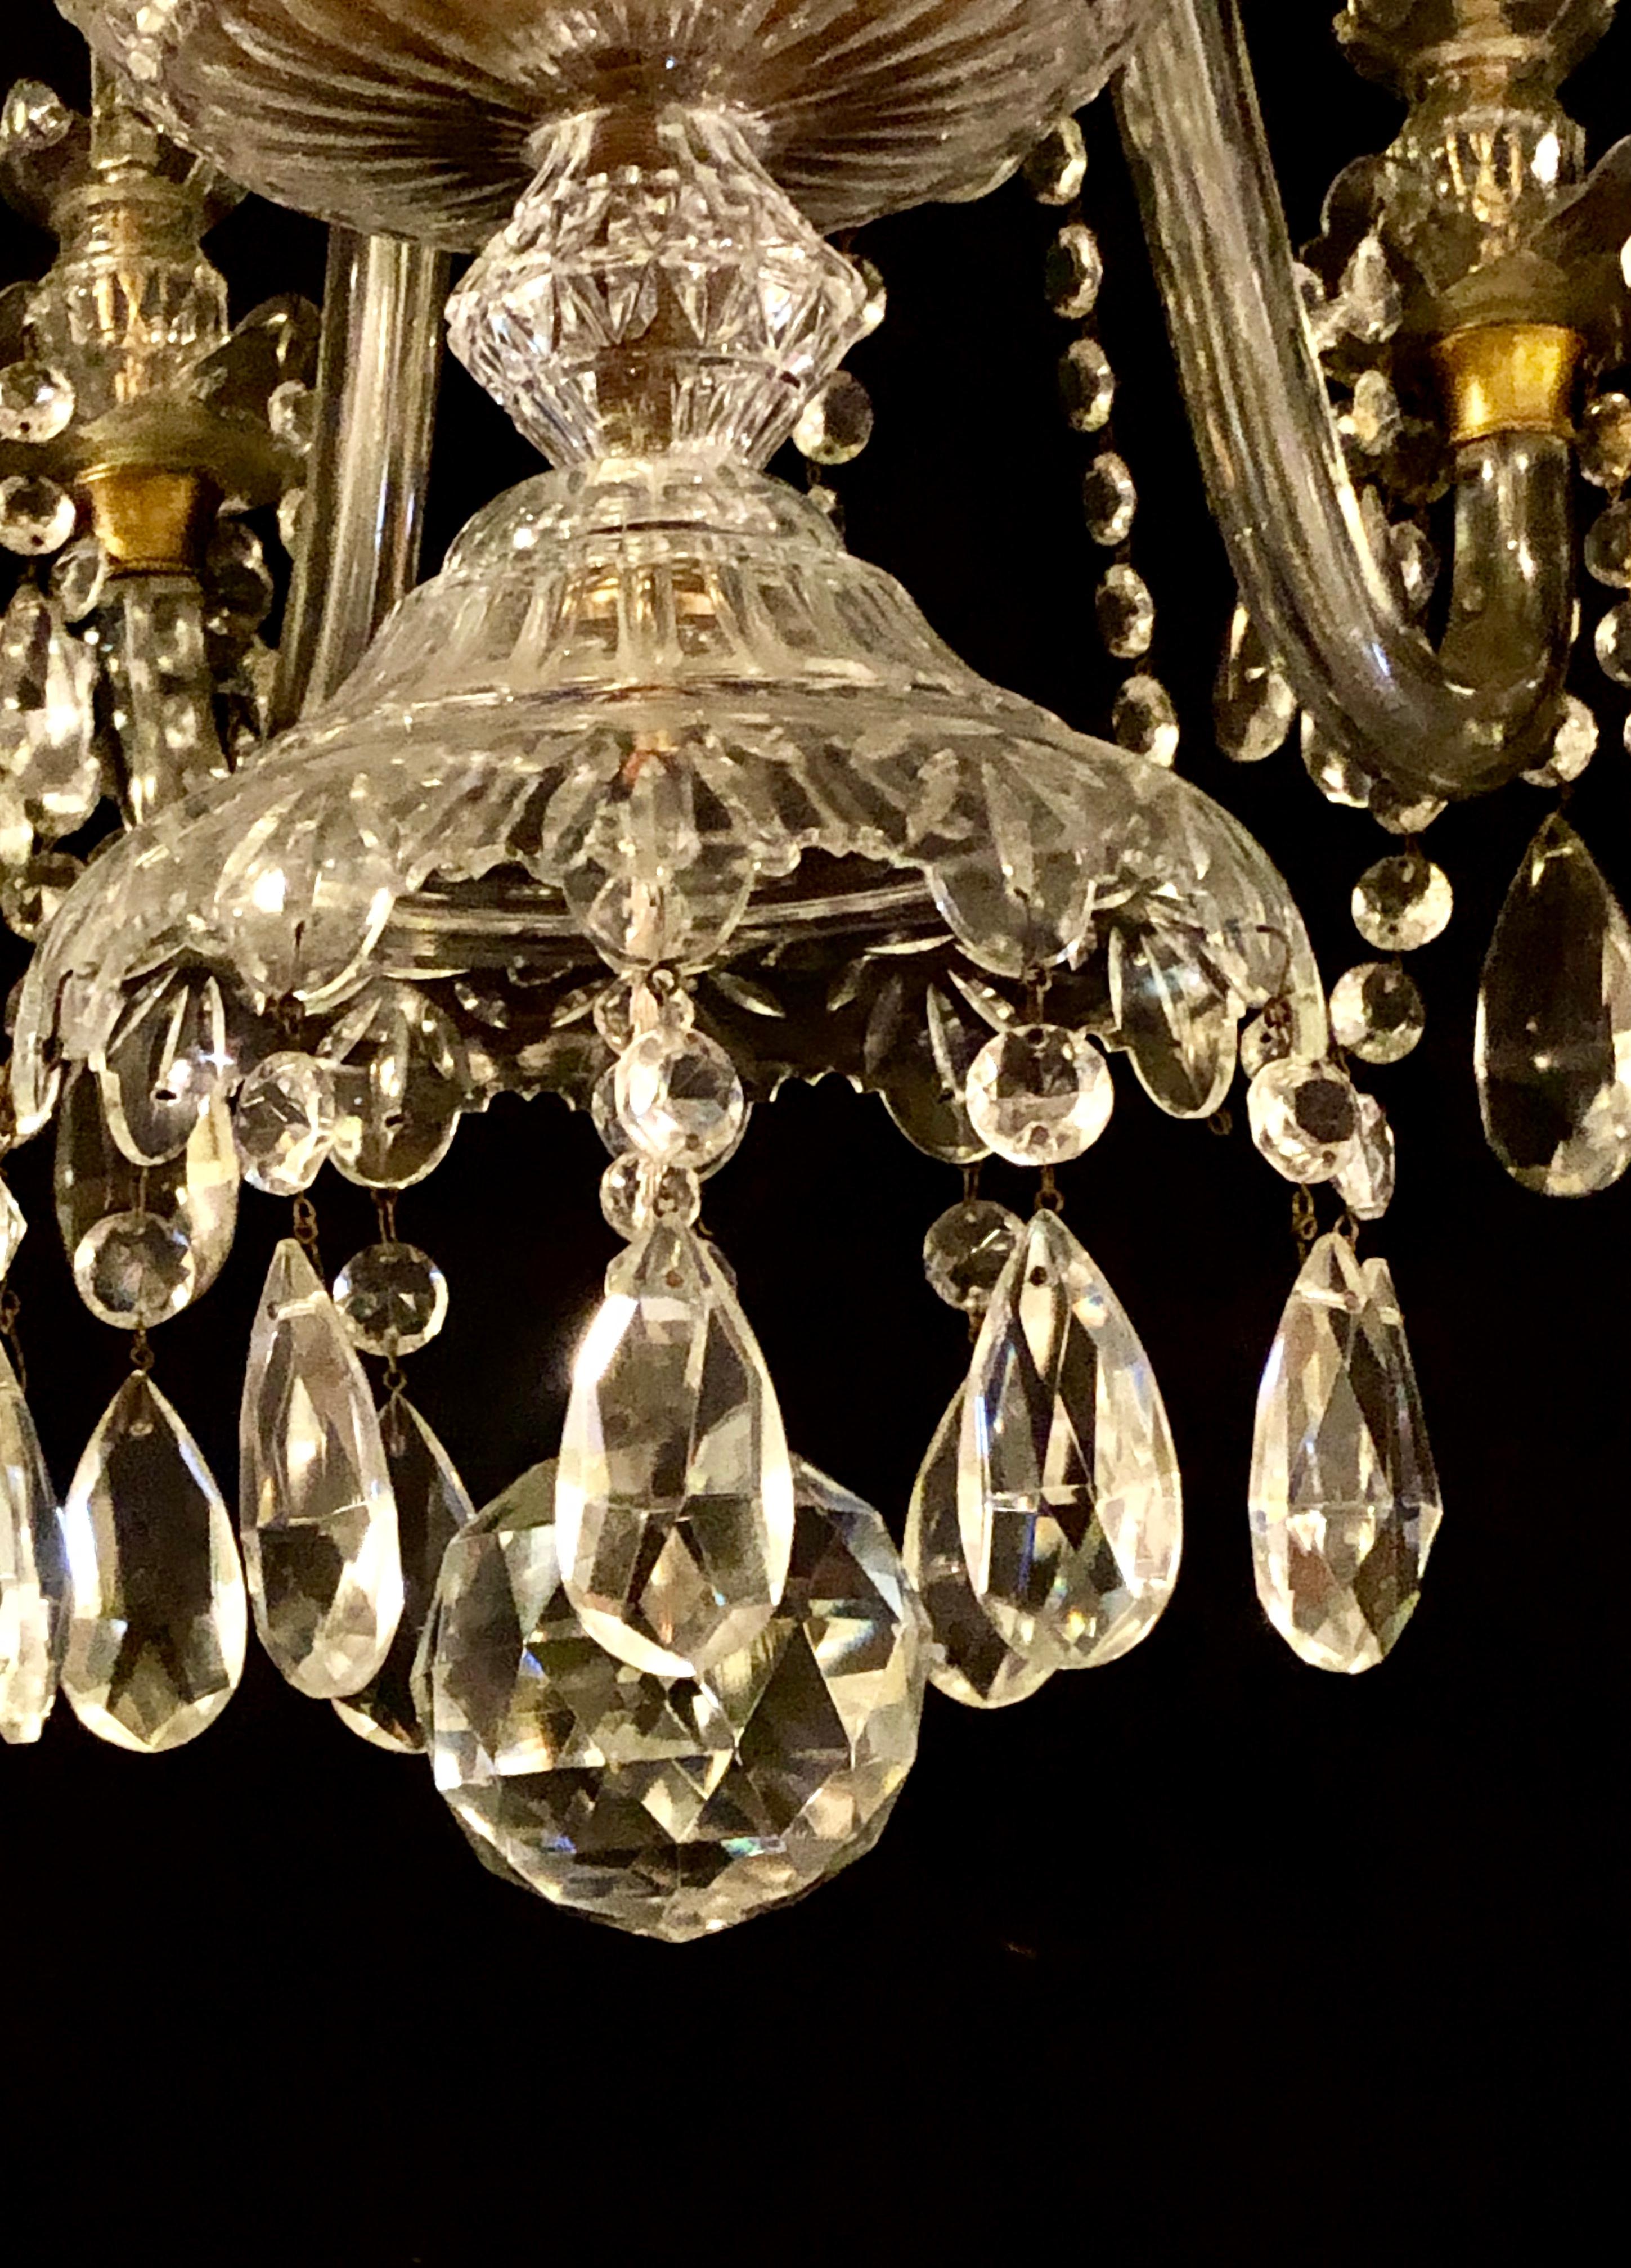 20th Century Waterford Style 1940 Cut Crystal Chandelier with Palatial Center Column Sphere